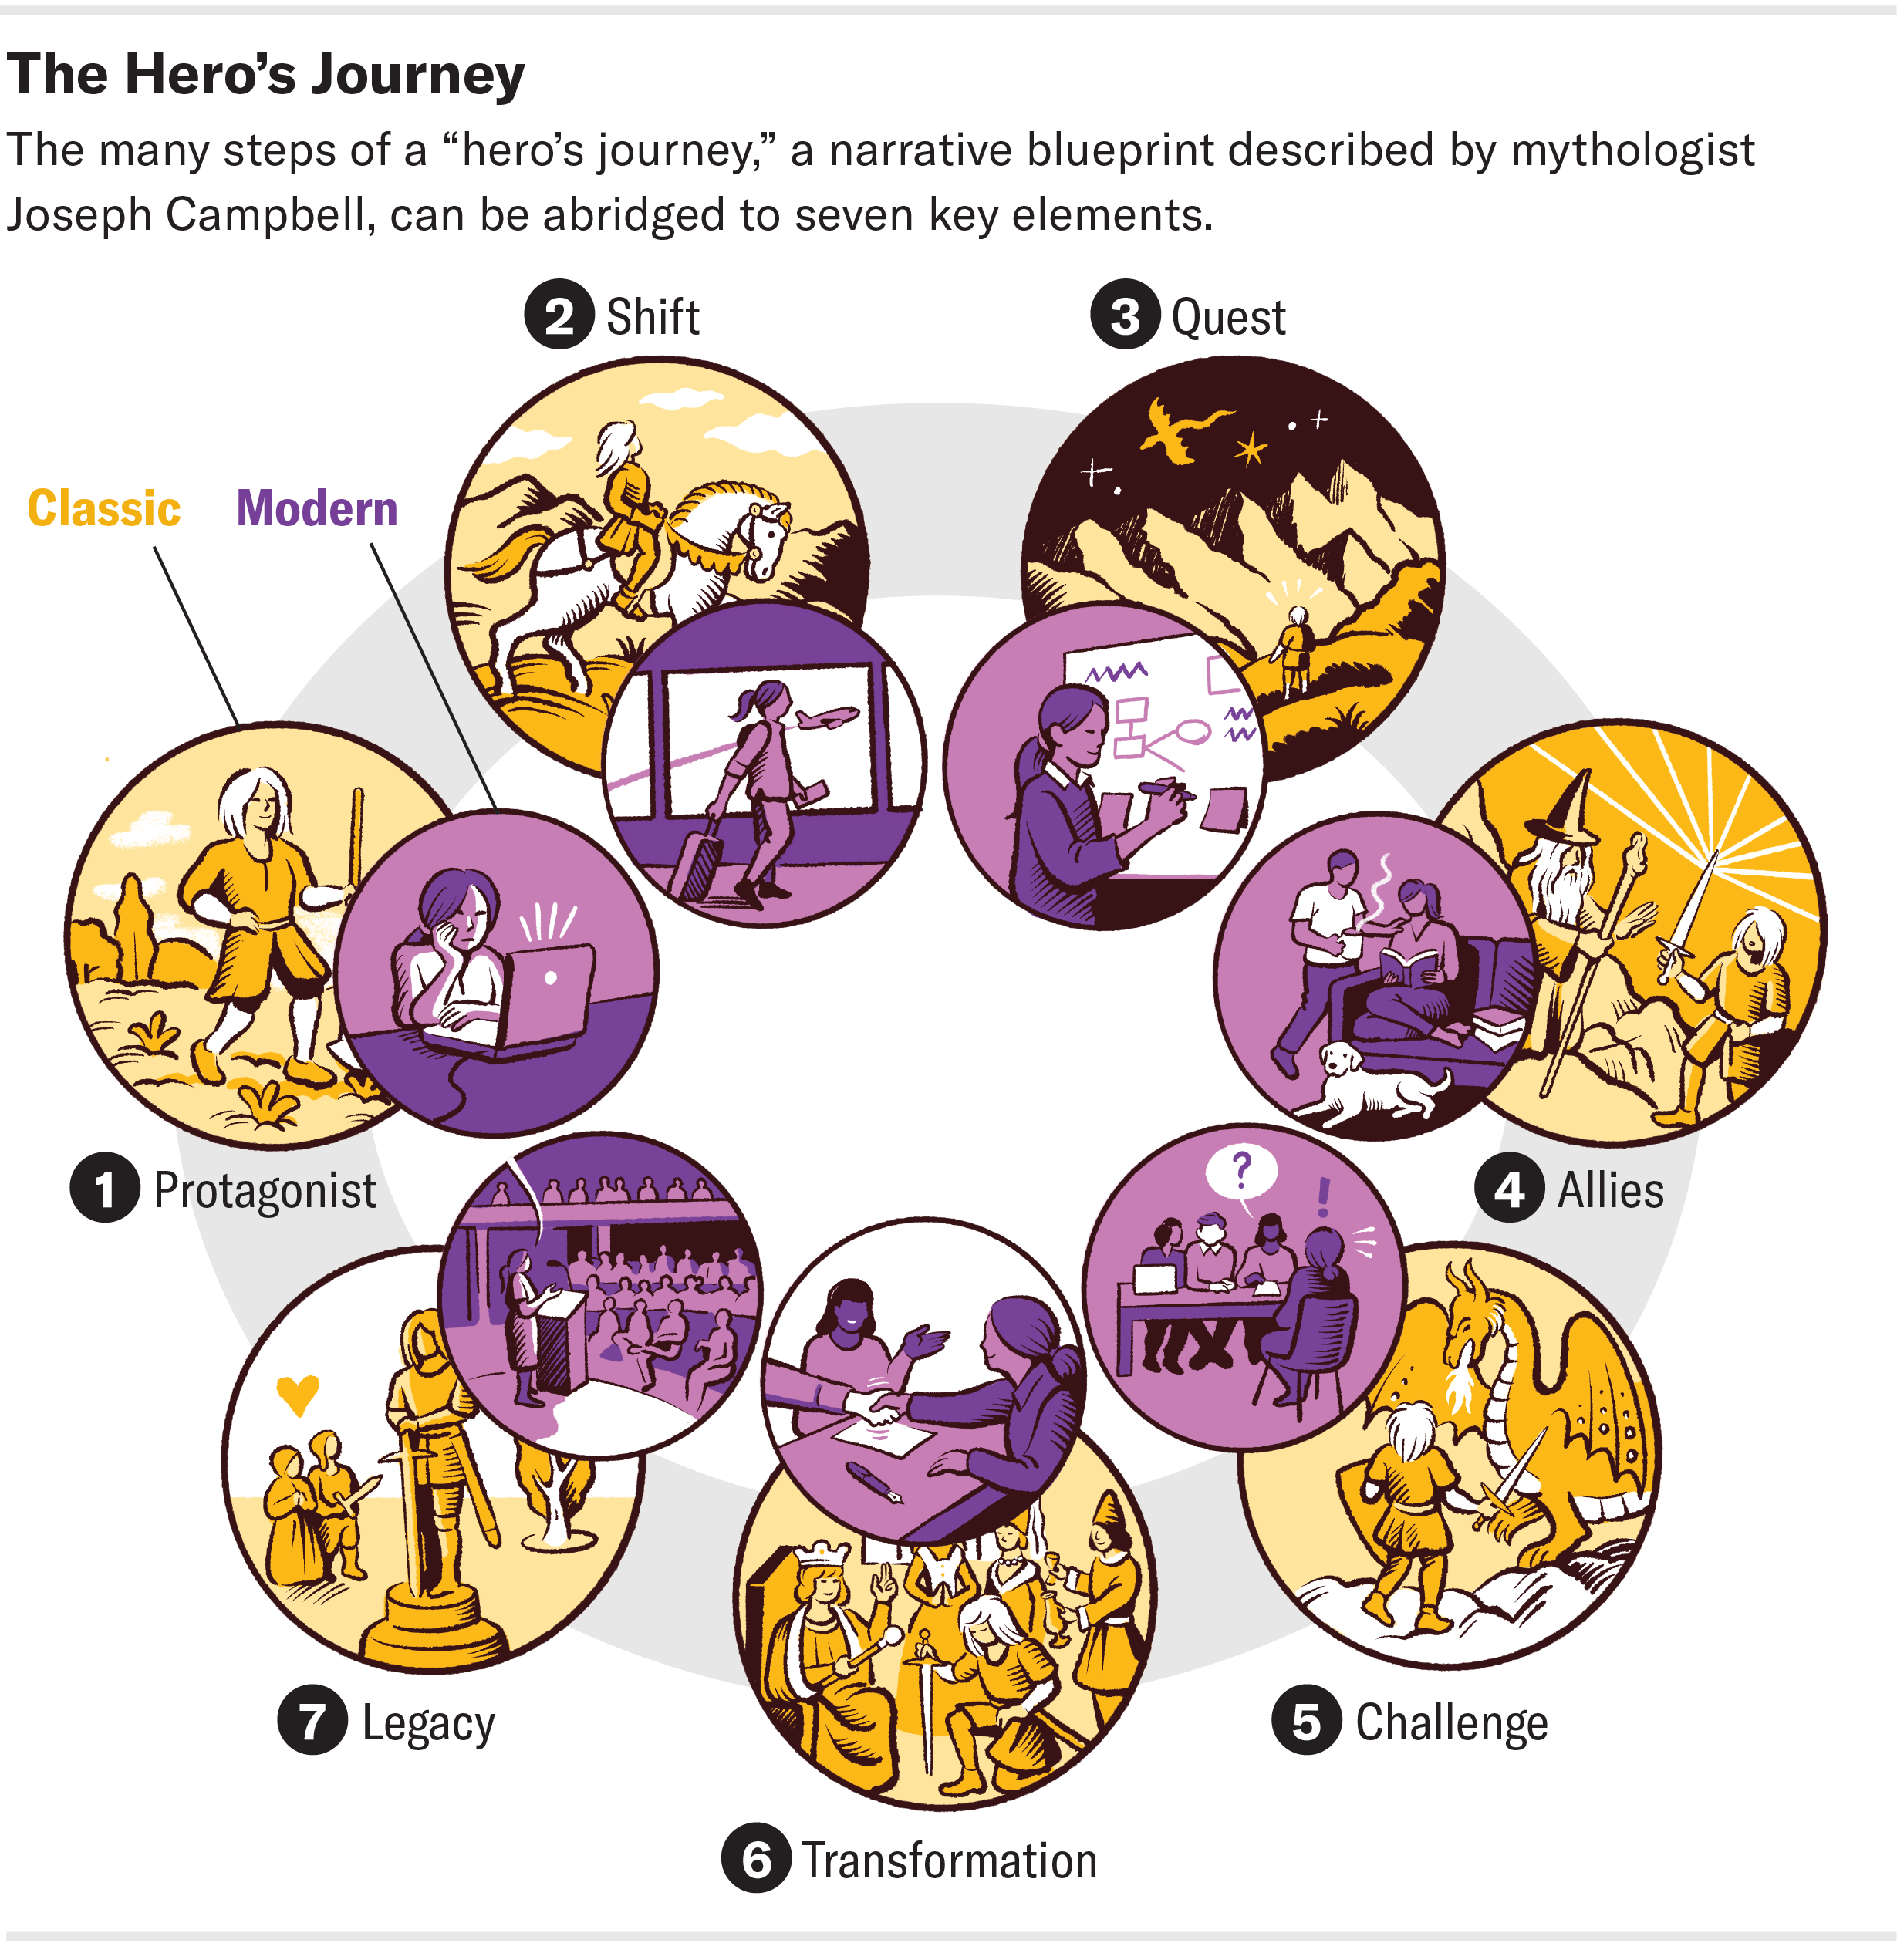 Comic-style illustrations show classic and modern interpretations of the seven key elements of the hero’s journey: protagonist, shift, quest, allies, challenge, transformation and legacy.